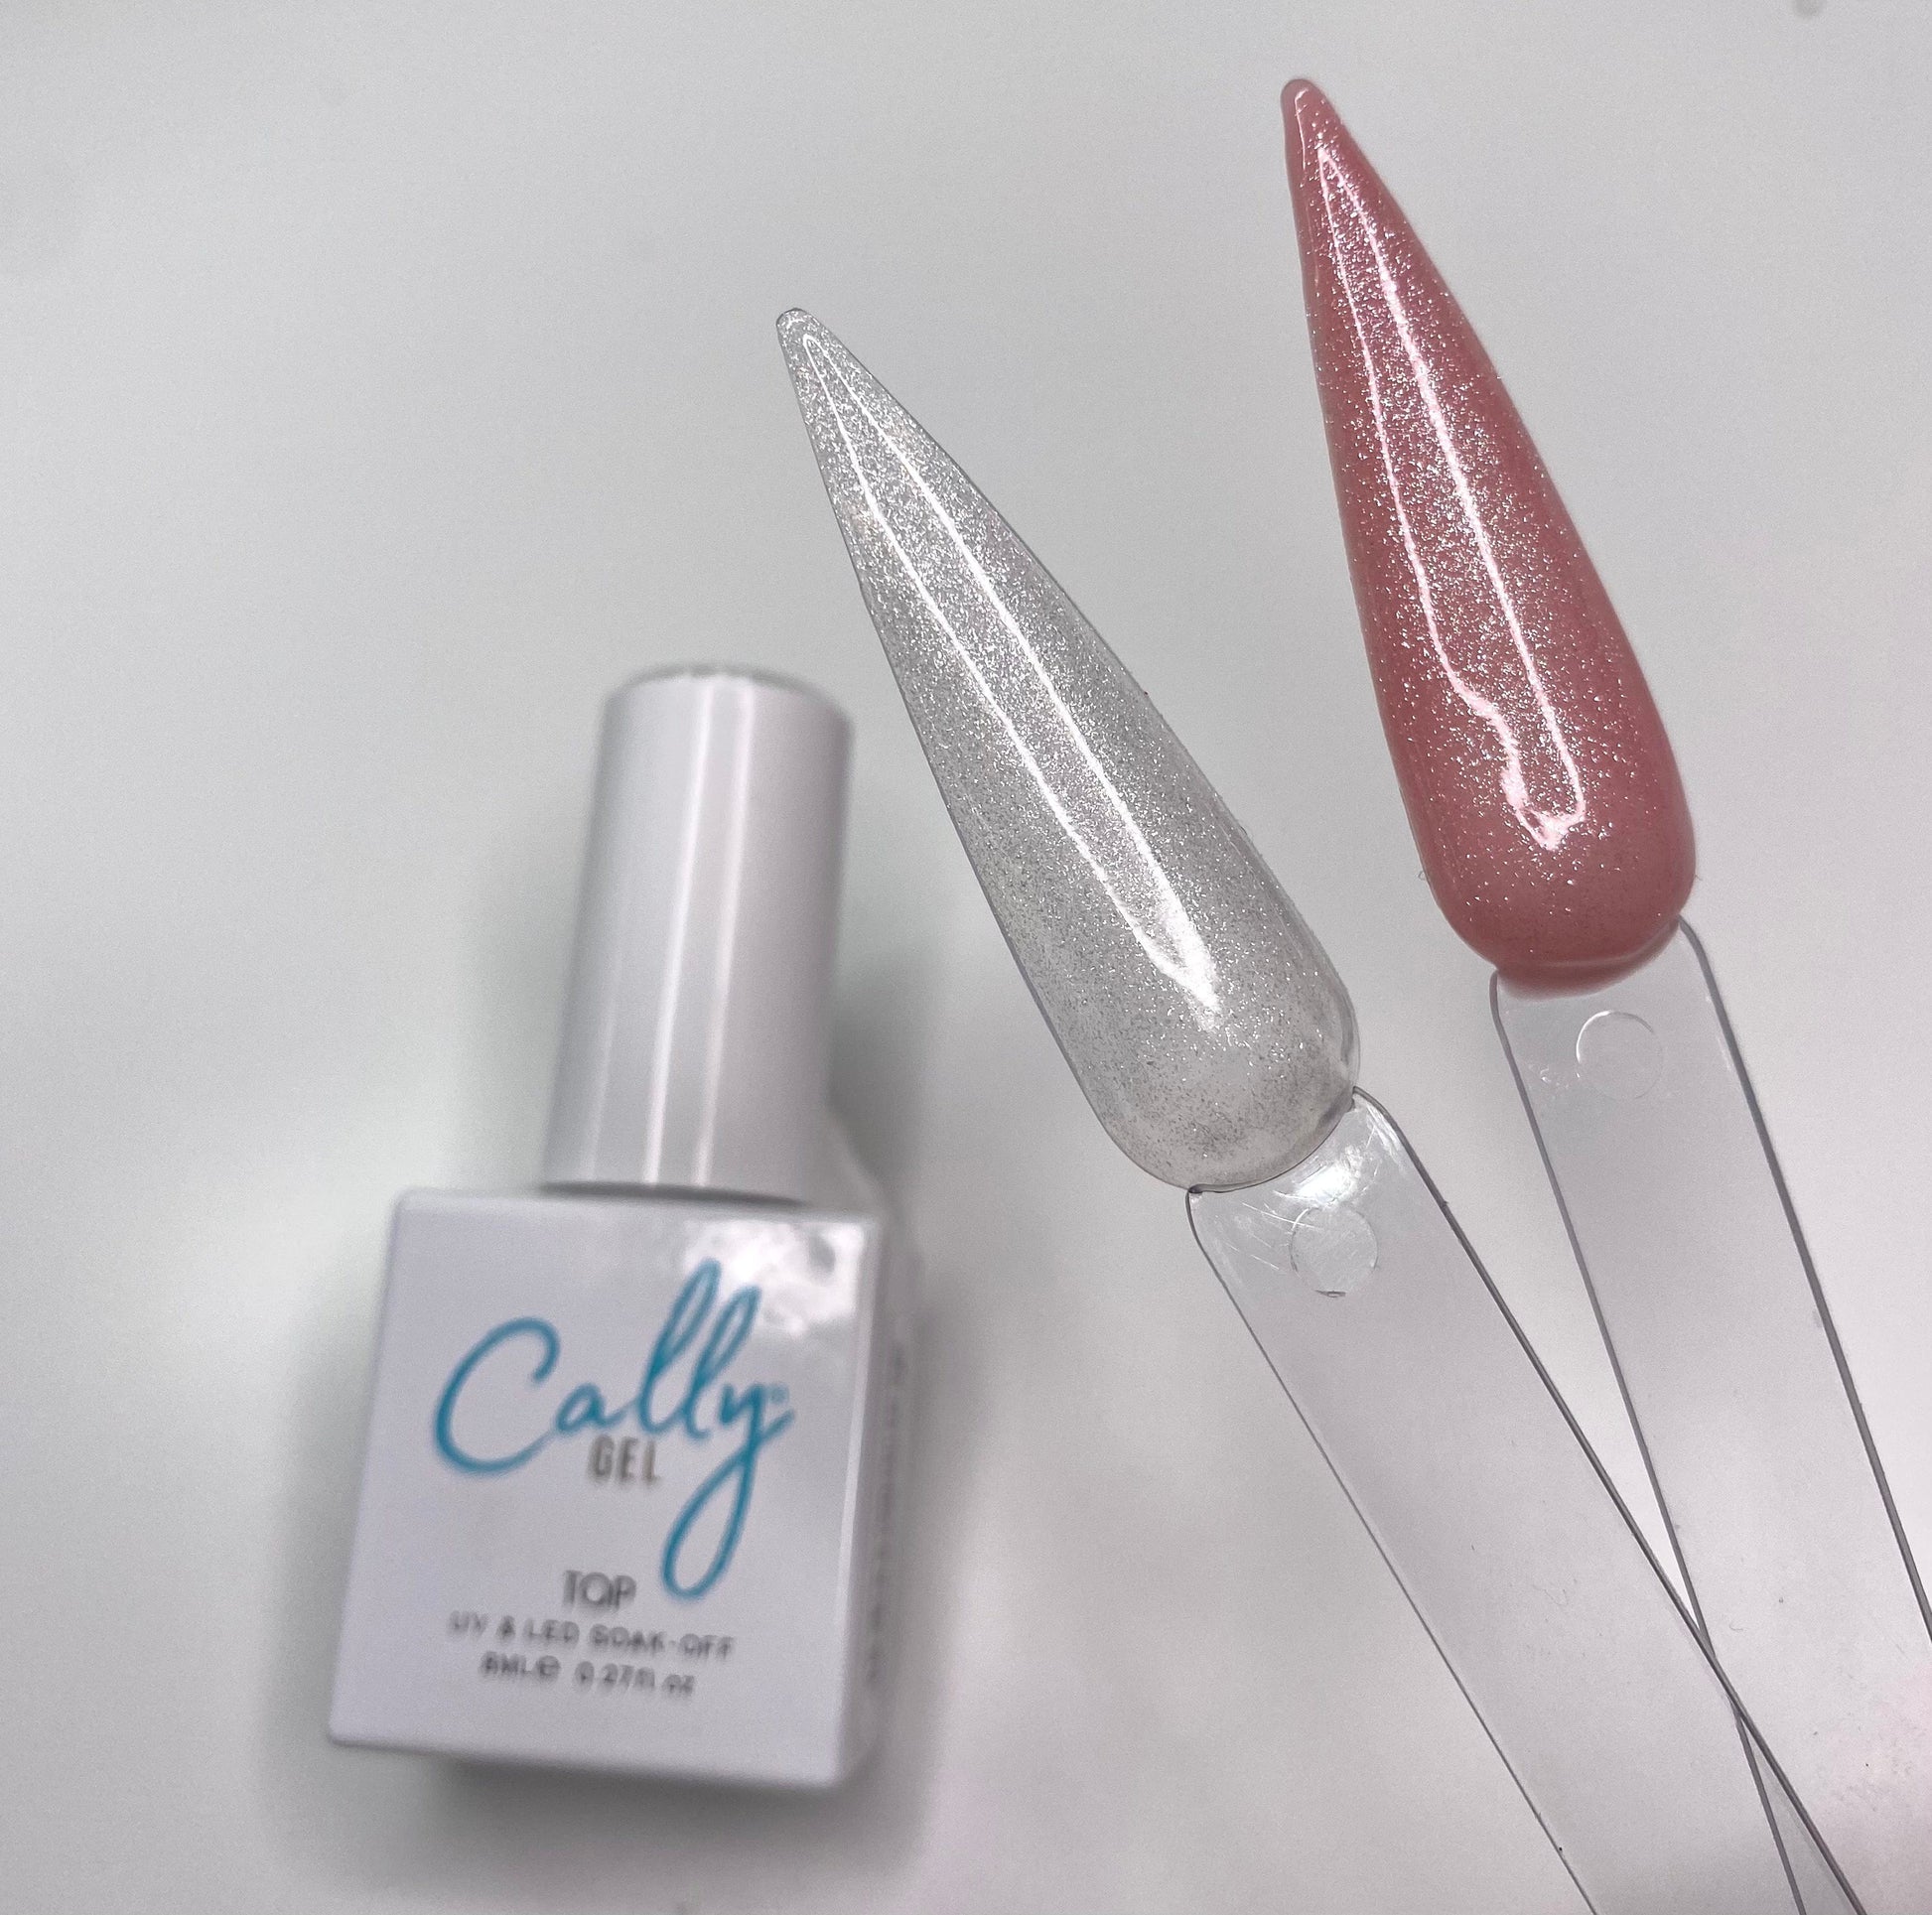 Galaxy Cally Gel Top Coat 8ml Bottle with colour sample